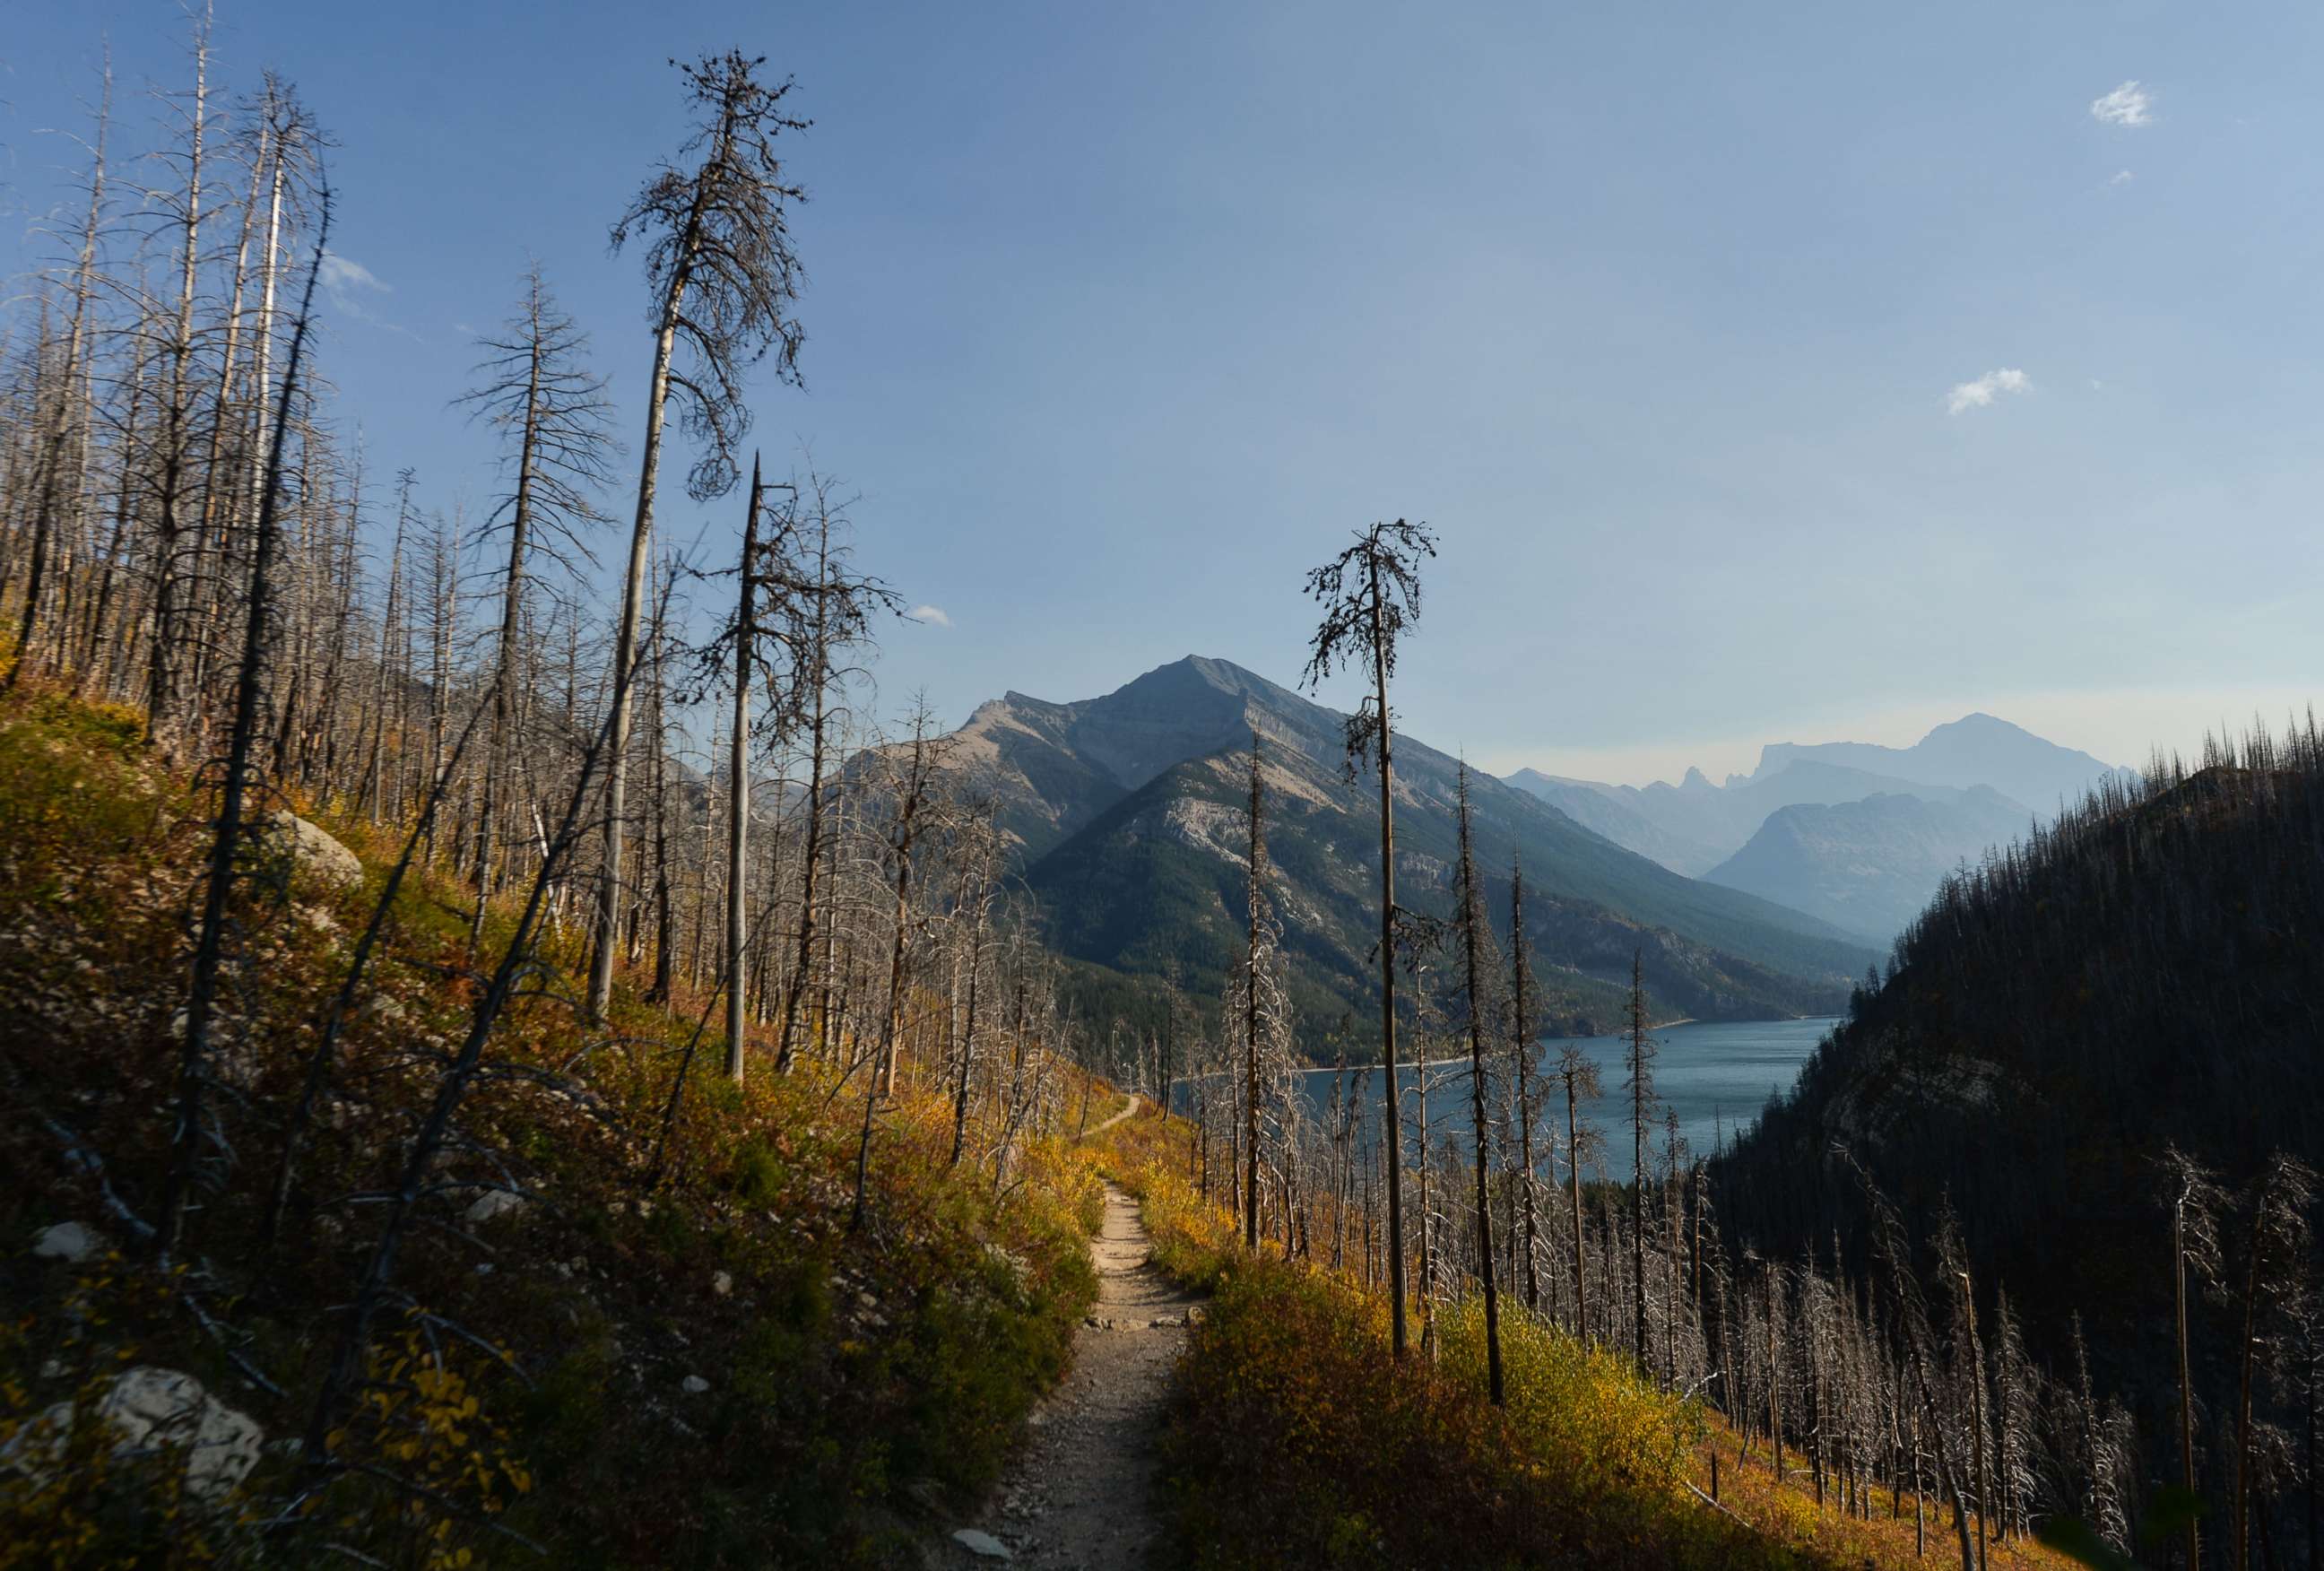 PHOTO: The burned trees in Waterton Lakes National Park, Oct. 6, 2021, in Waterton, Alberta, Canada.